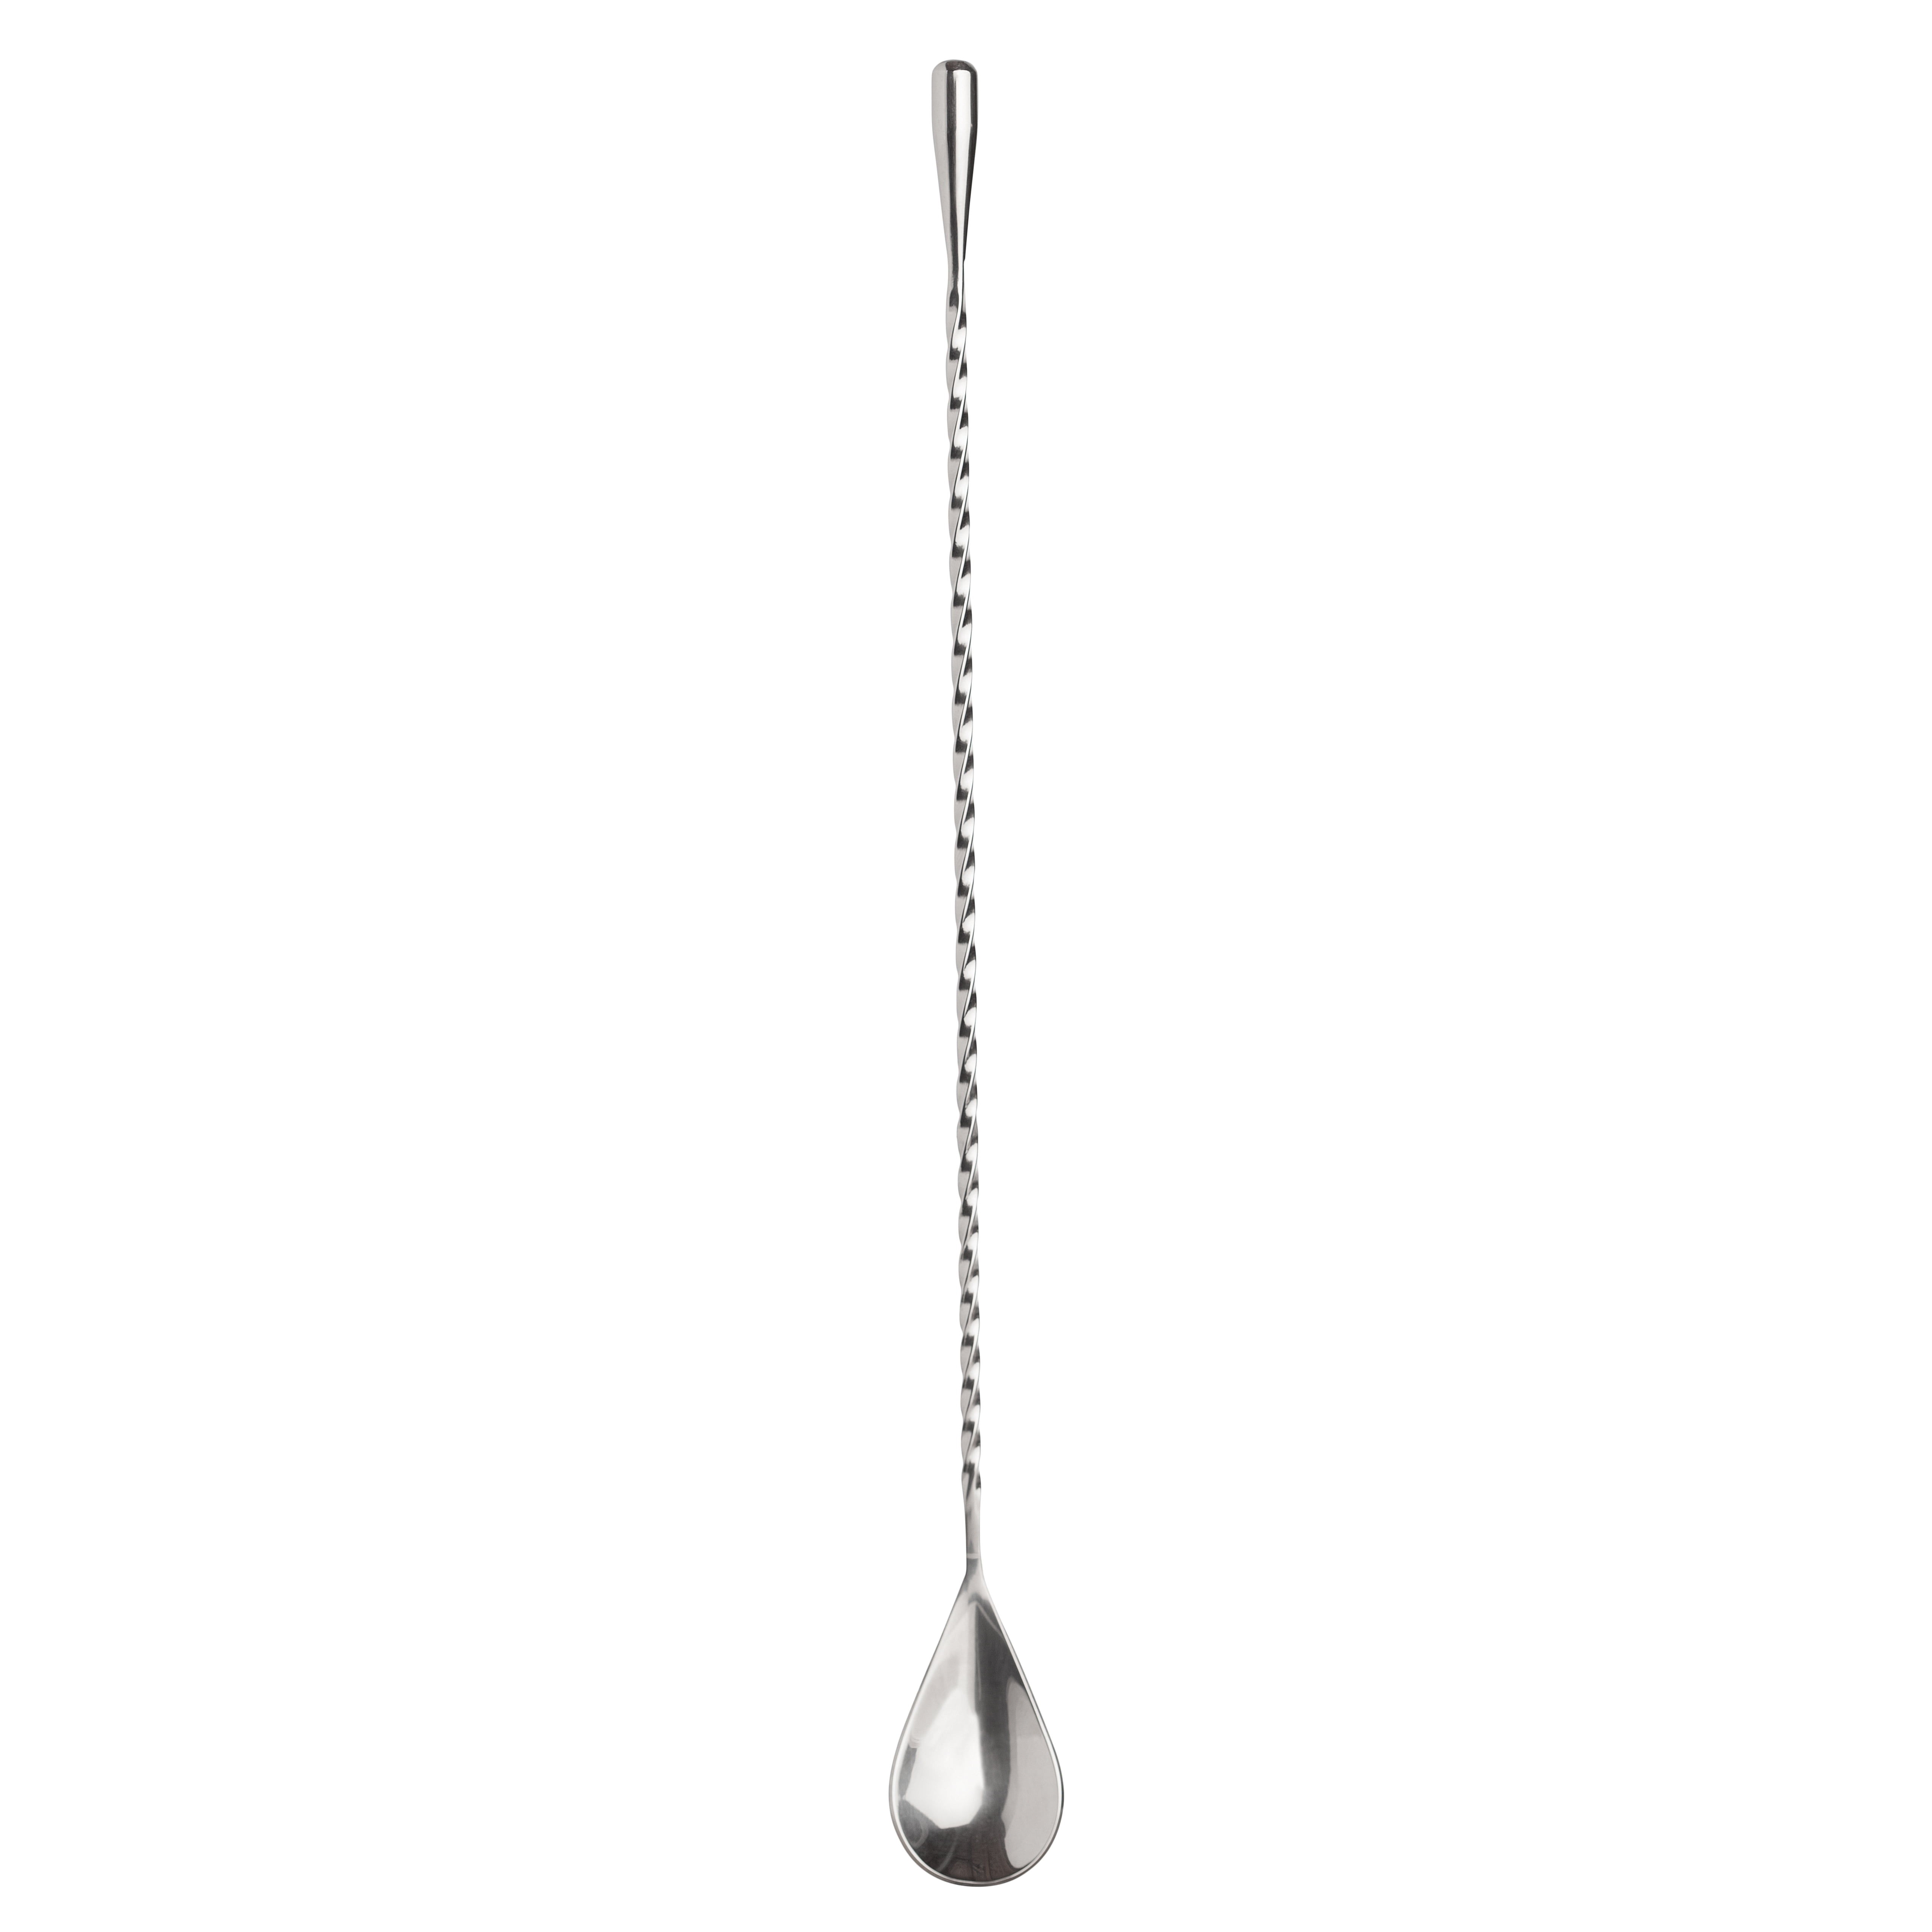 HIC Bar Spoon Cocktail Mixing Spoon, 18/8 Stainless 12-Inches - Walmart.com